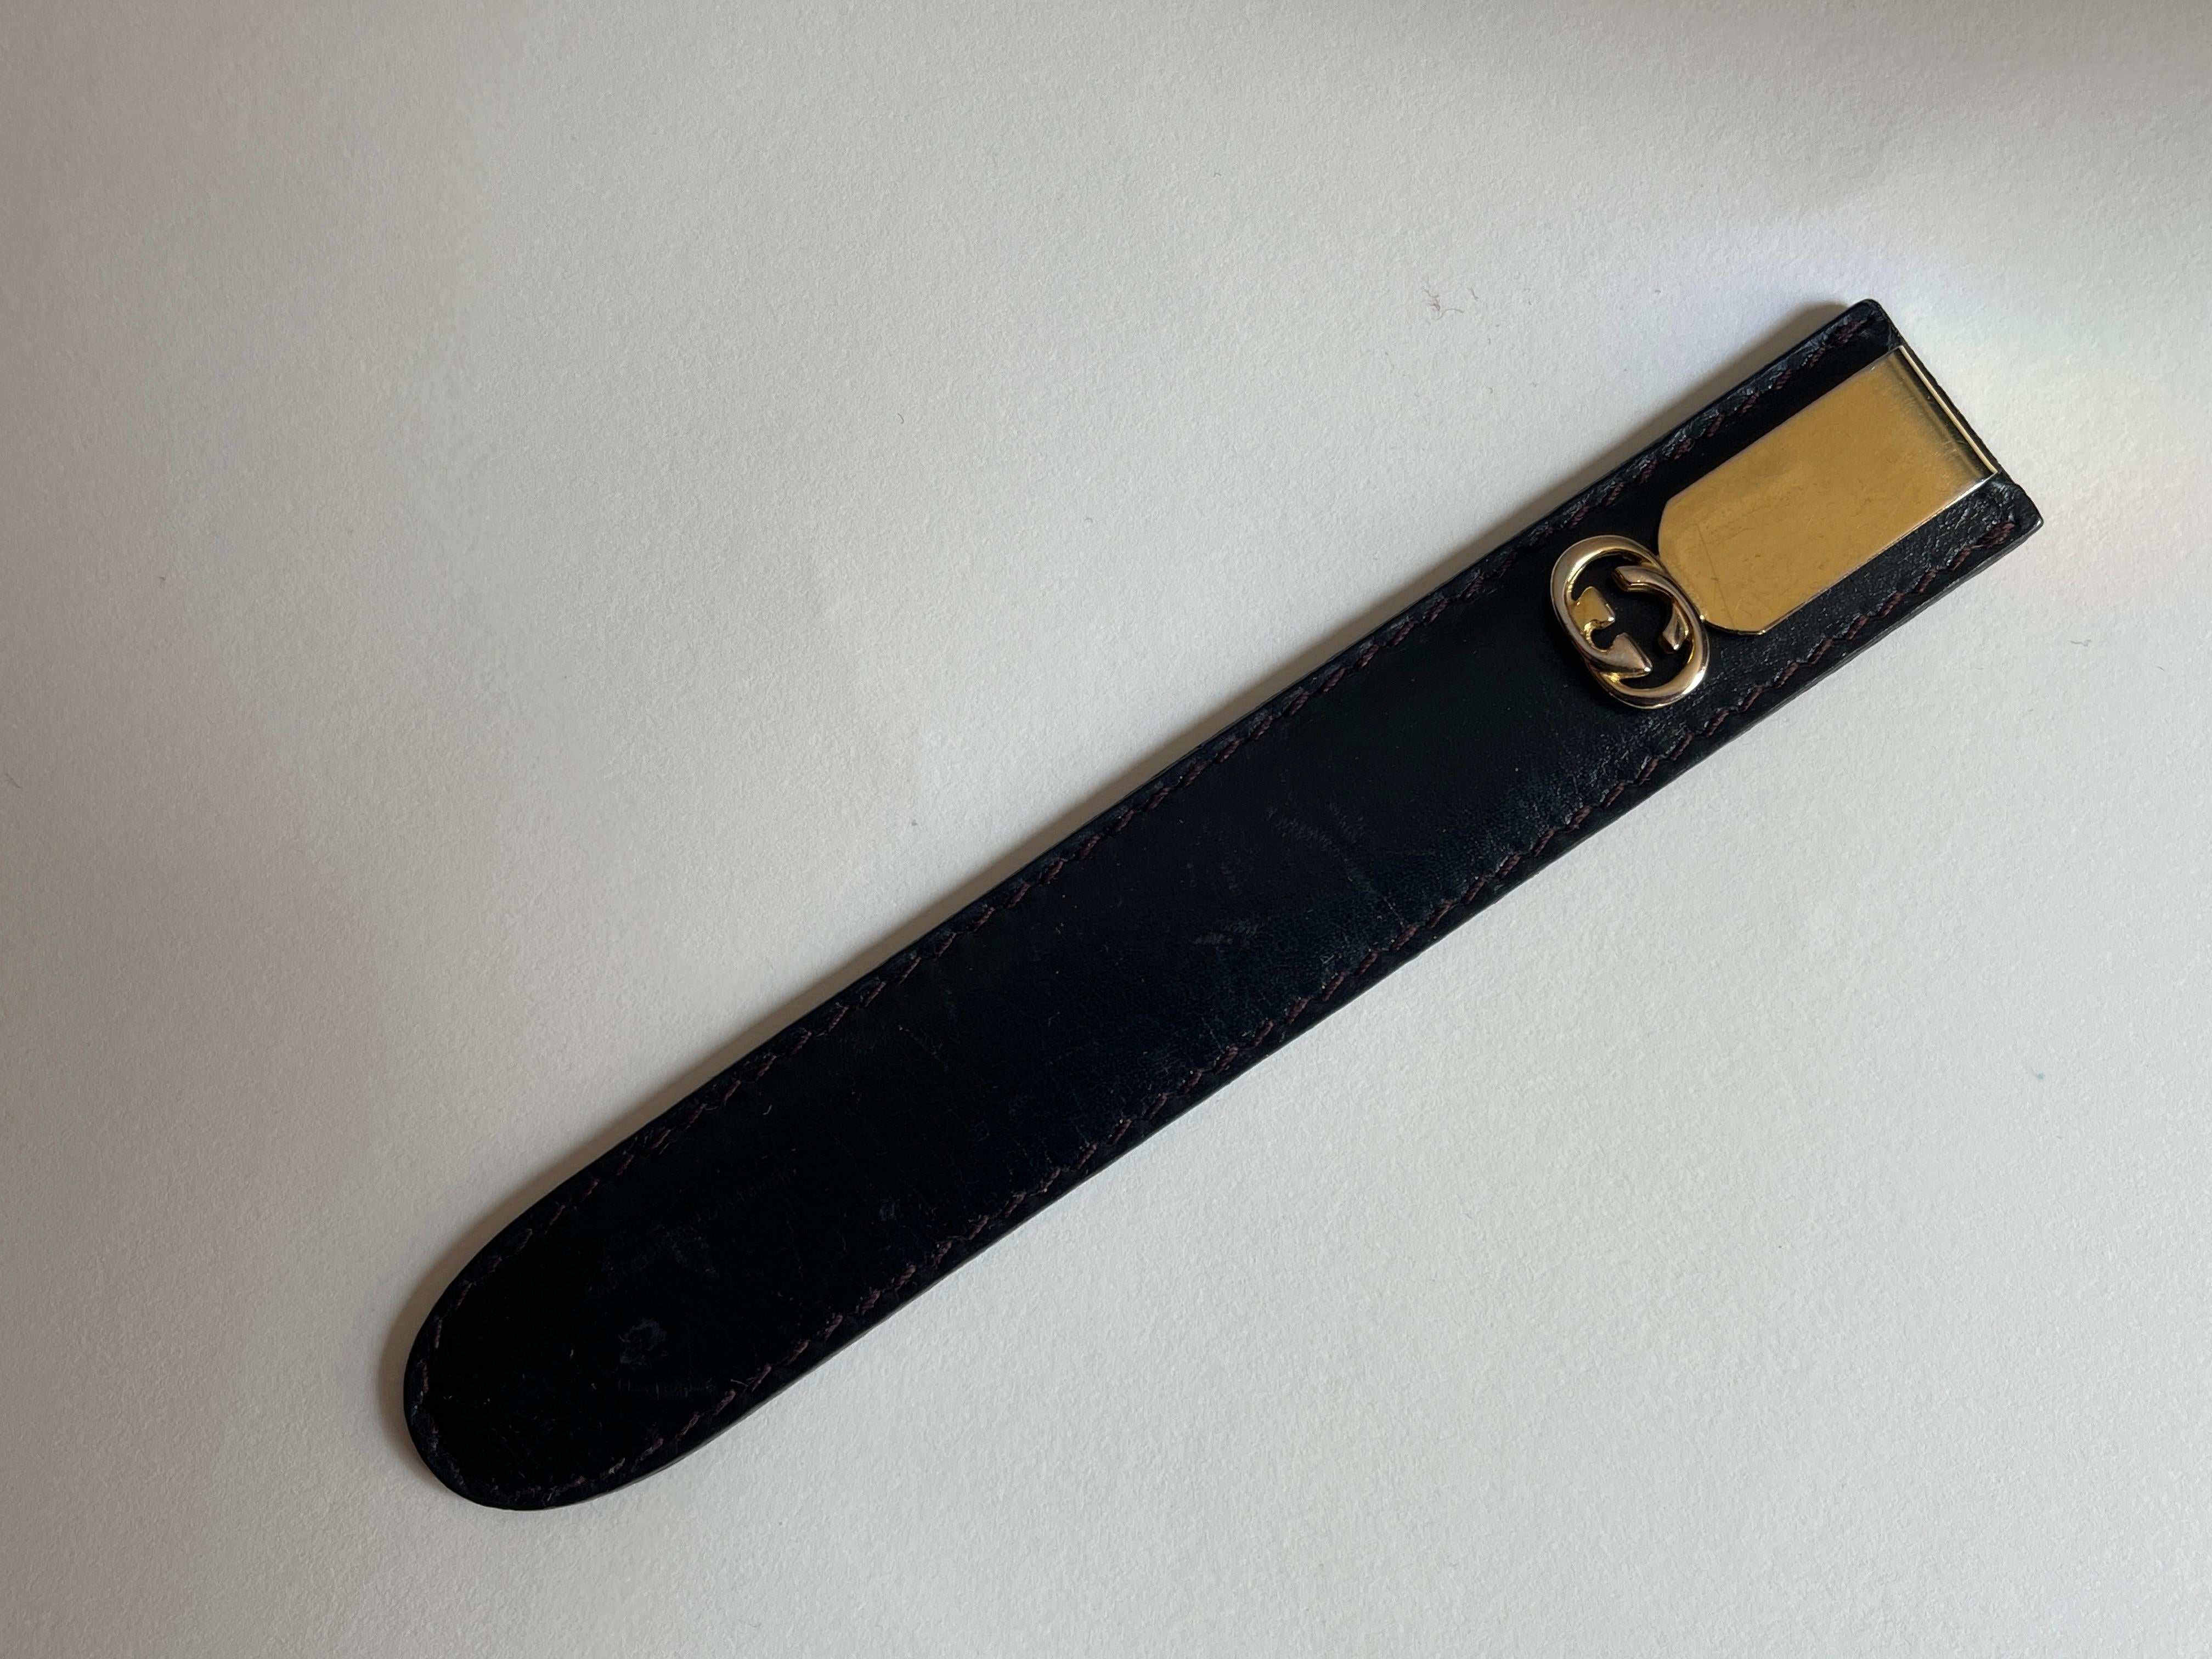 Embossed Gucci Gold Metal Letter Opener in Black Leather Case For Sale